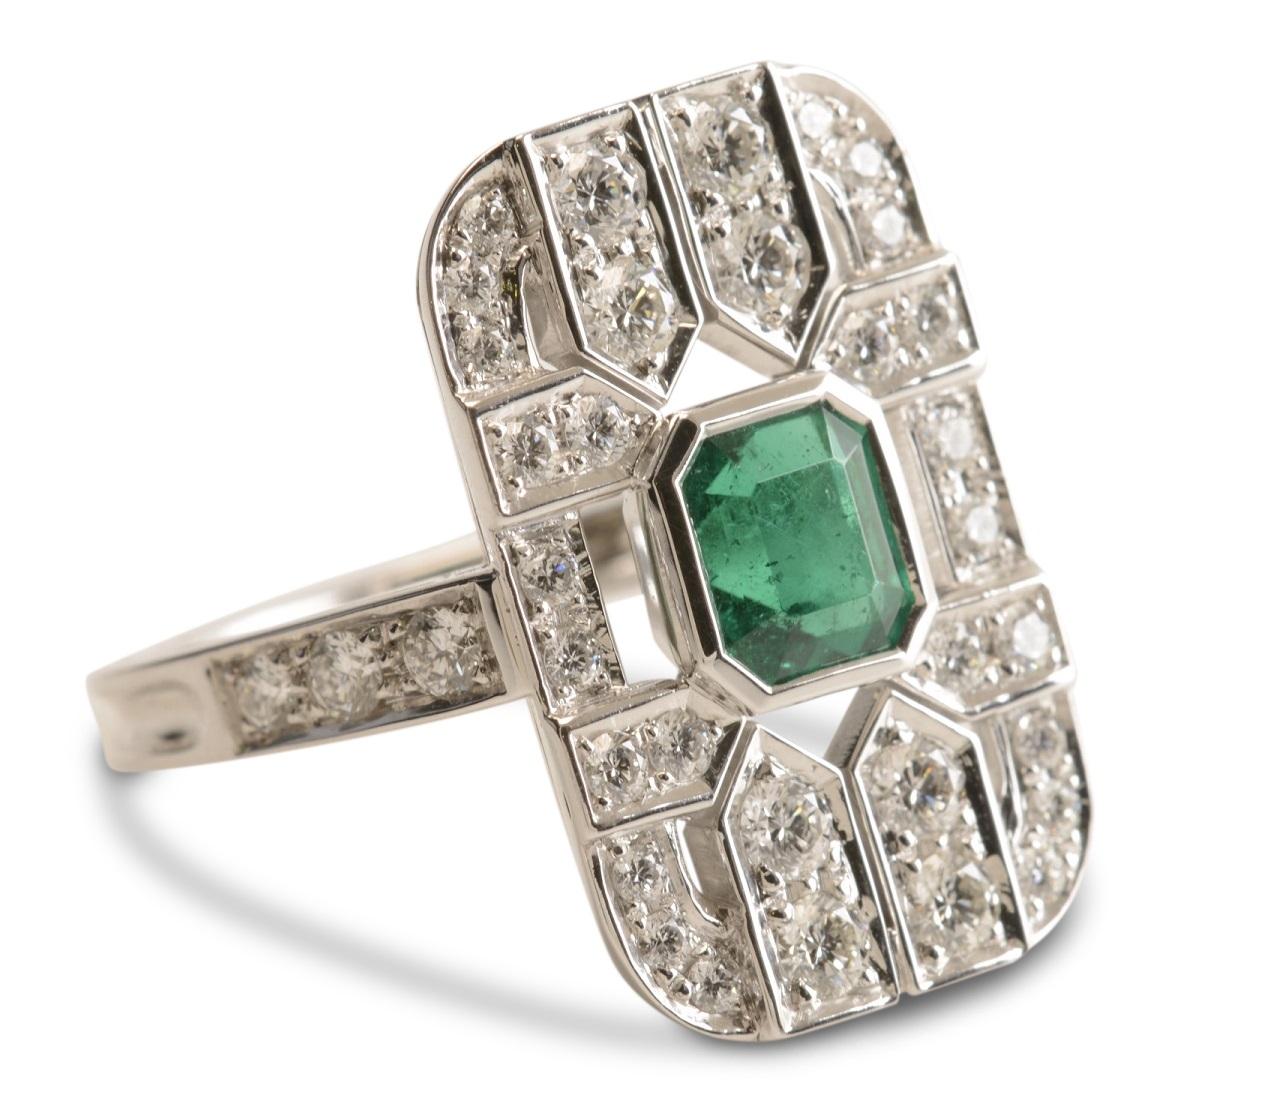 Emerald Cut Colombian Emerald 1.28 Carat and Diamond Art Deco Tablet Ring in 18 Karat Gold For Sale